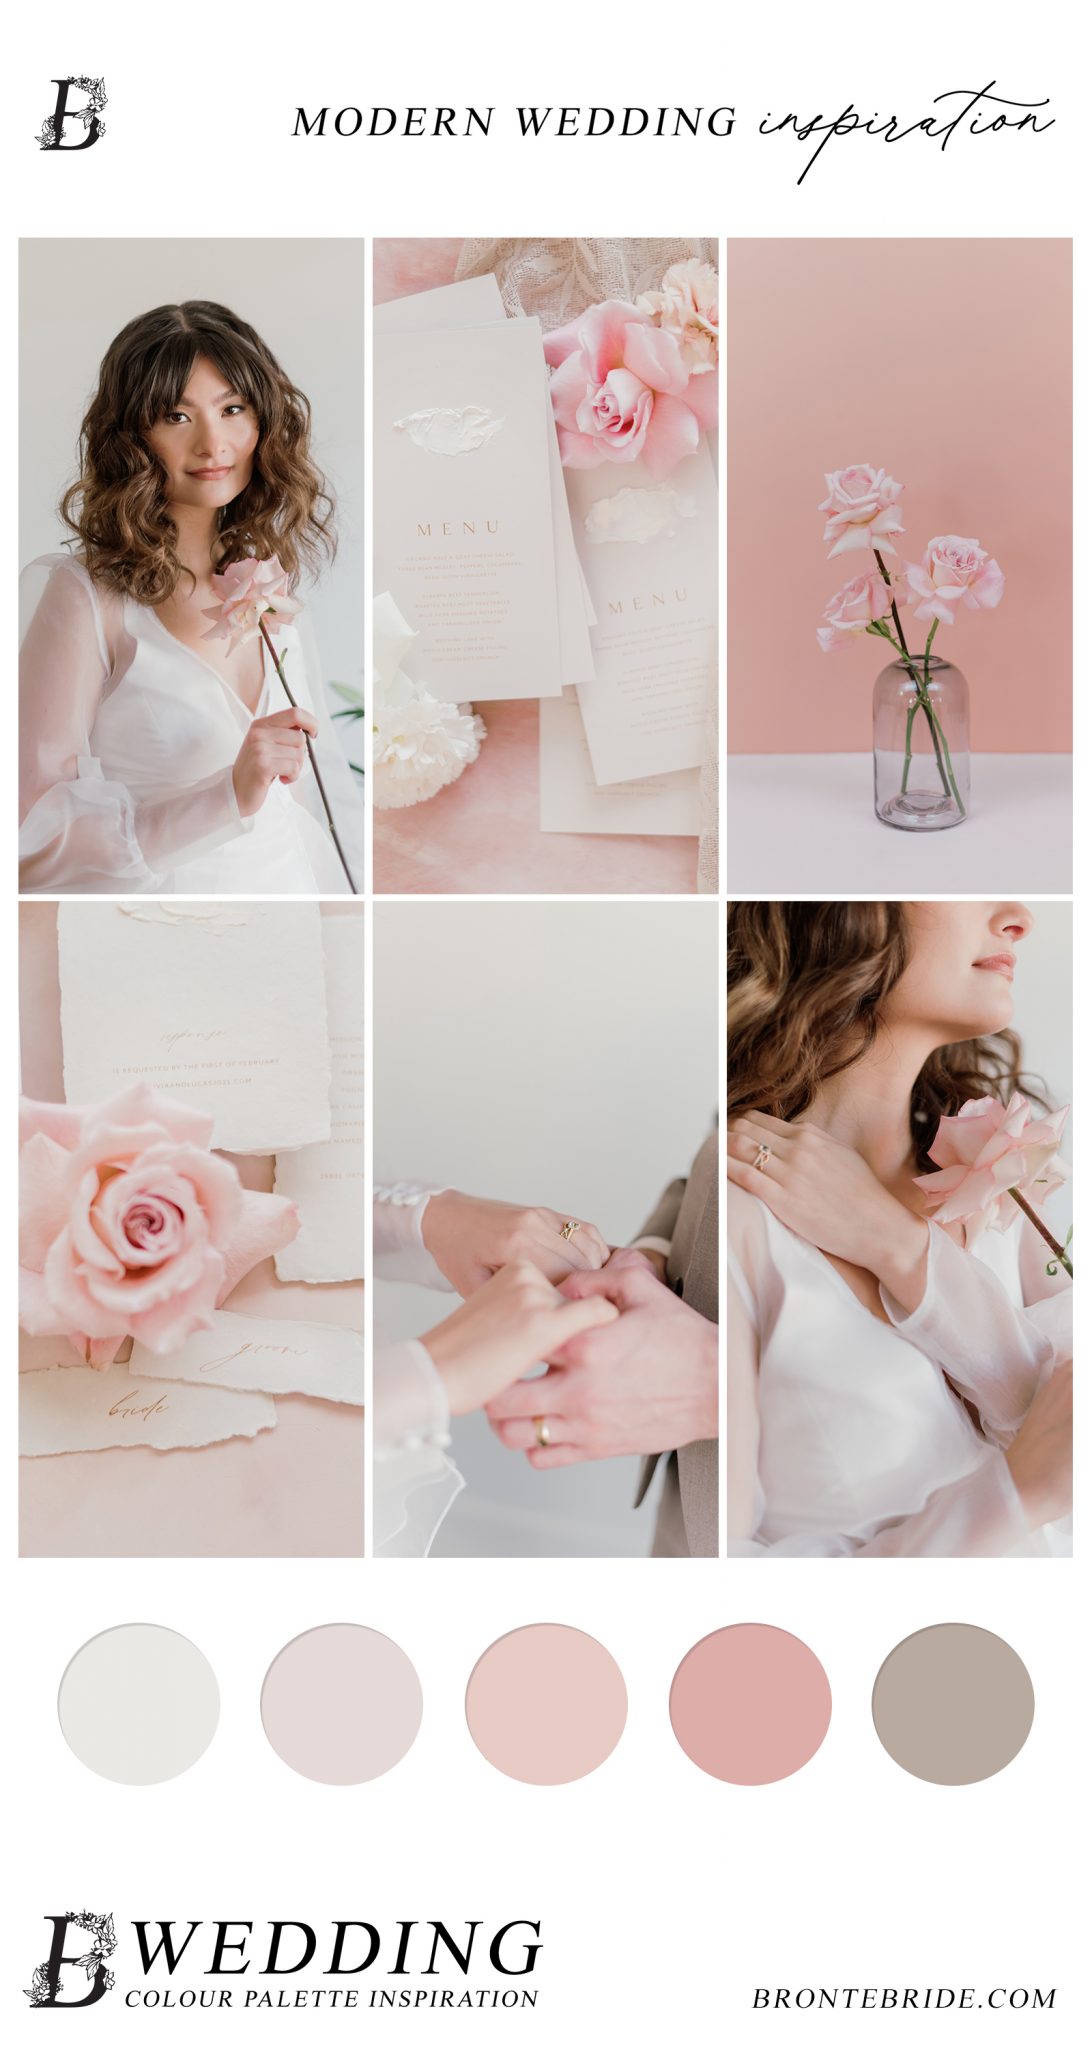 Modern Colour Palette Inspiration - Berry and Pink Wedding Colour Scheme on Bronte Bride 